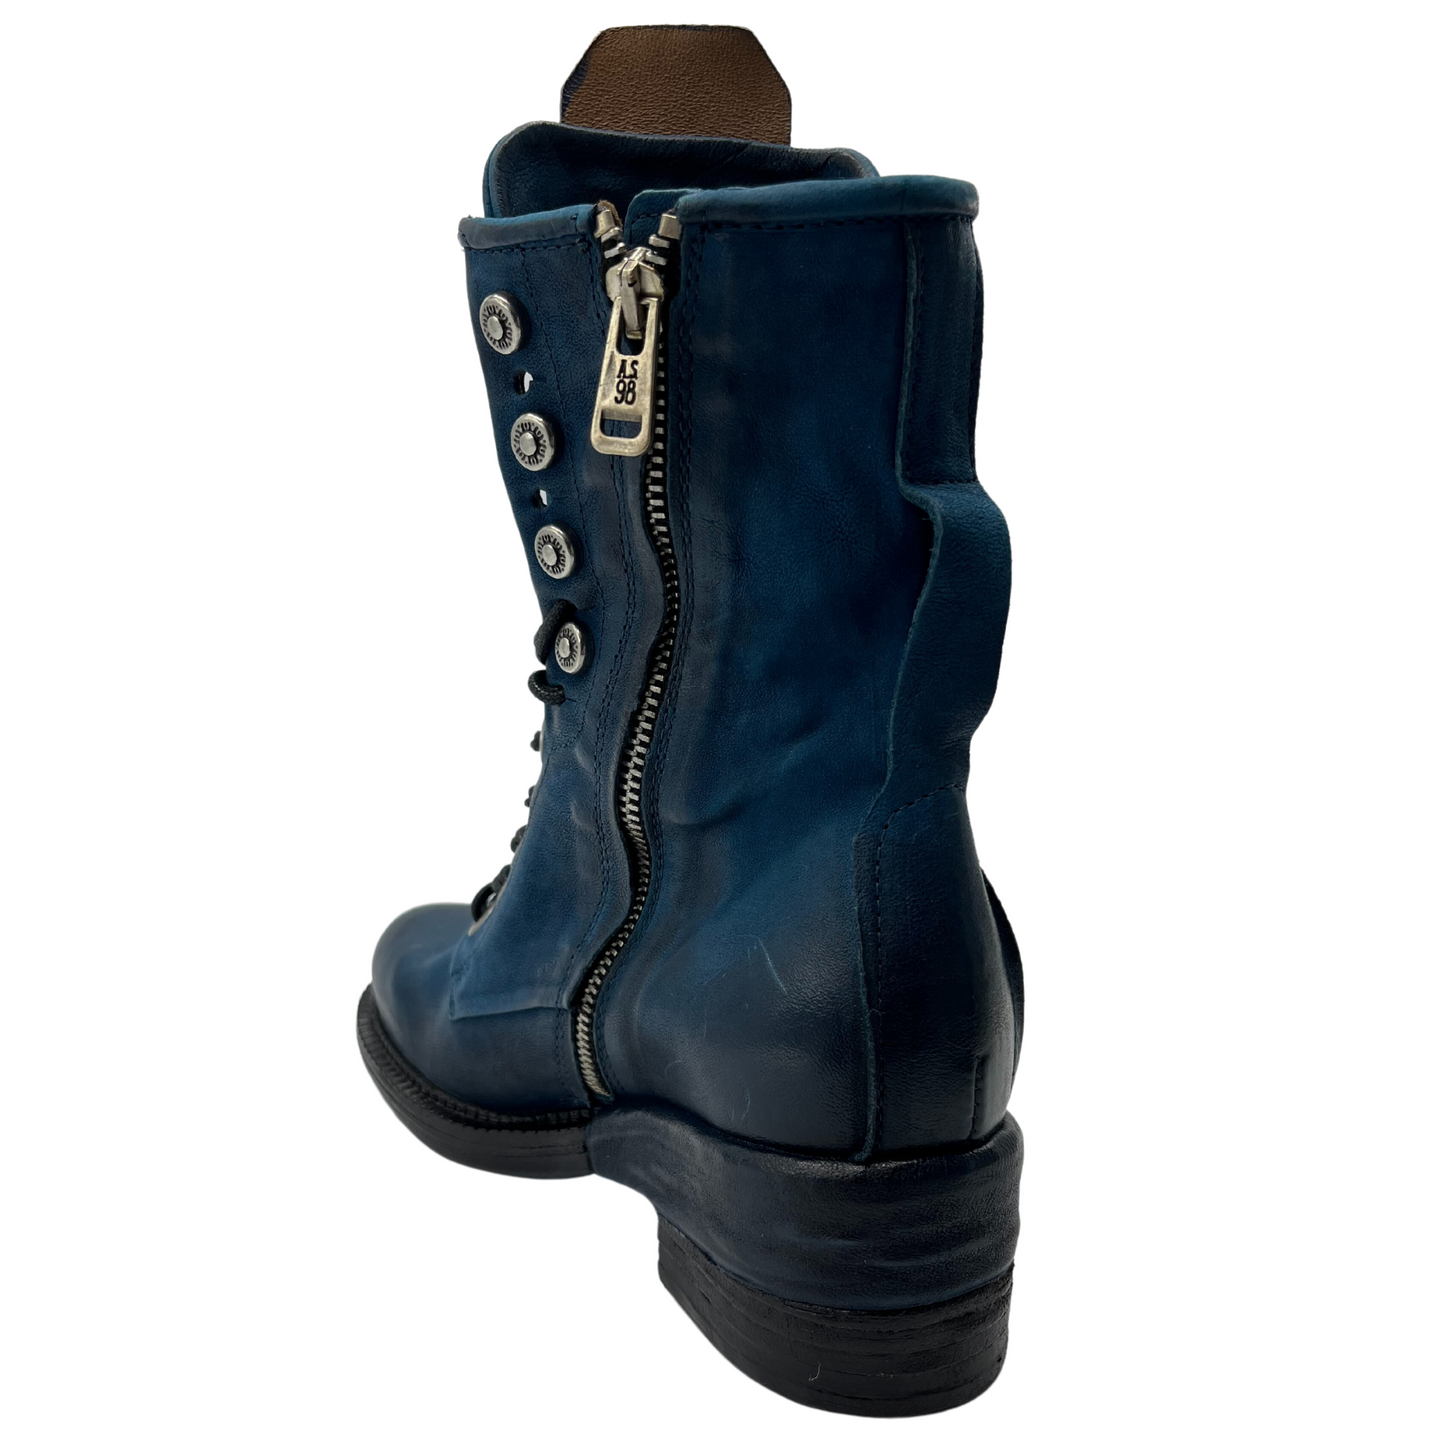 Back view of blue leather mid-calf boot with silver side zipper closure